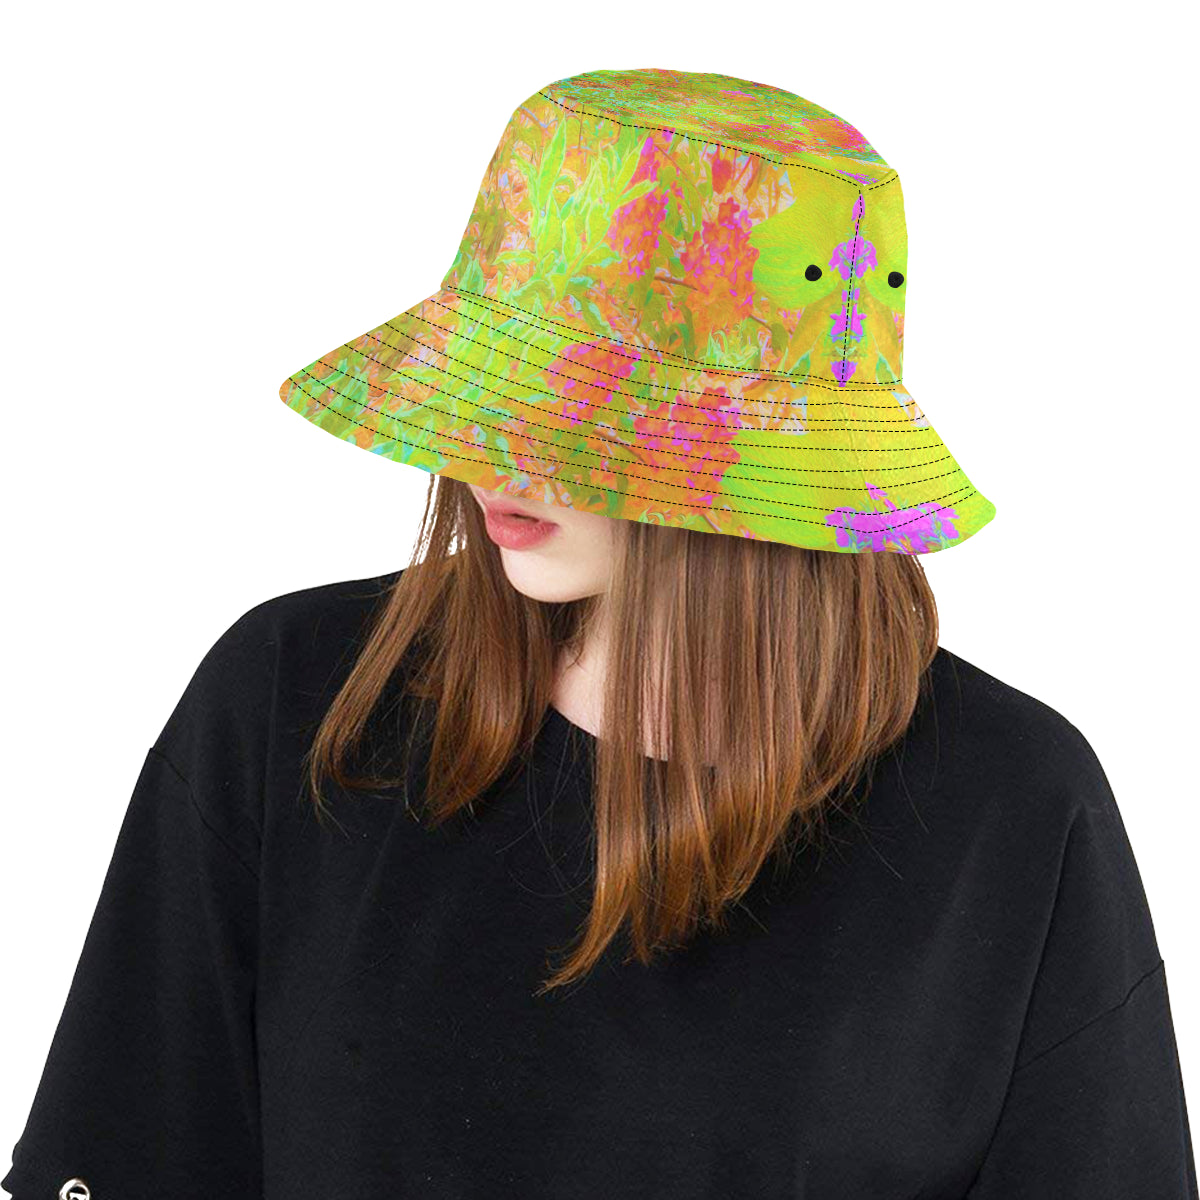 Bucket Hats, Autumn Colors Landscape with Hot Pink Hydrangea